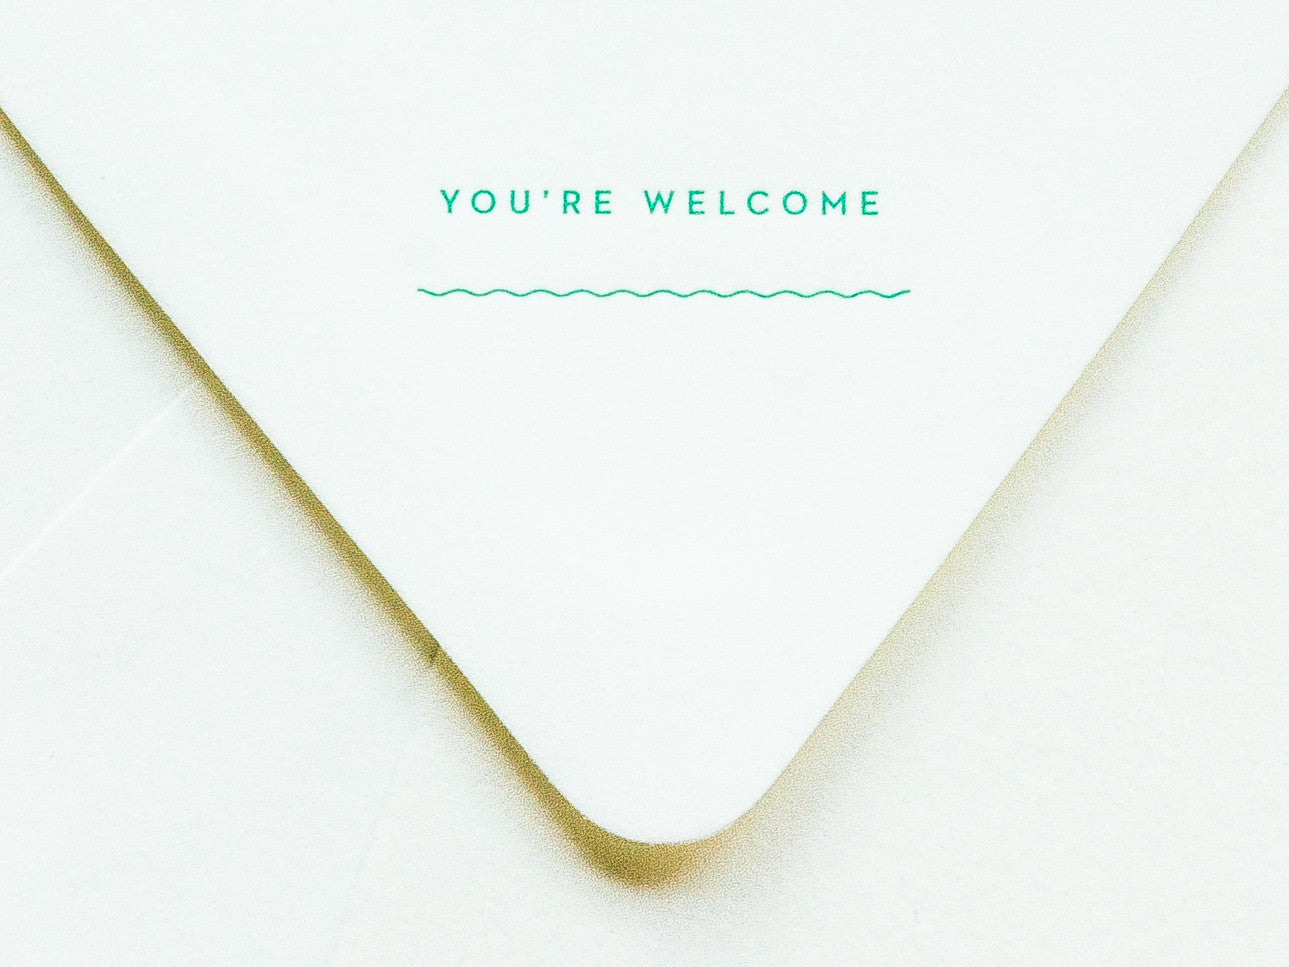 You're Welcome Notevelope & Toucan Notecard